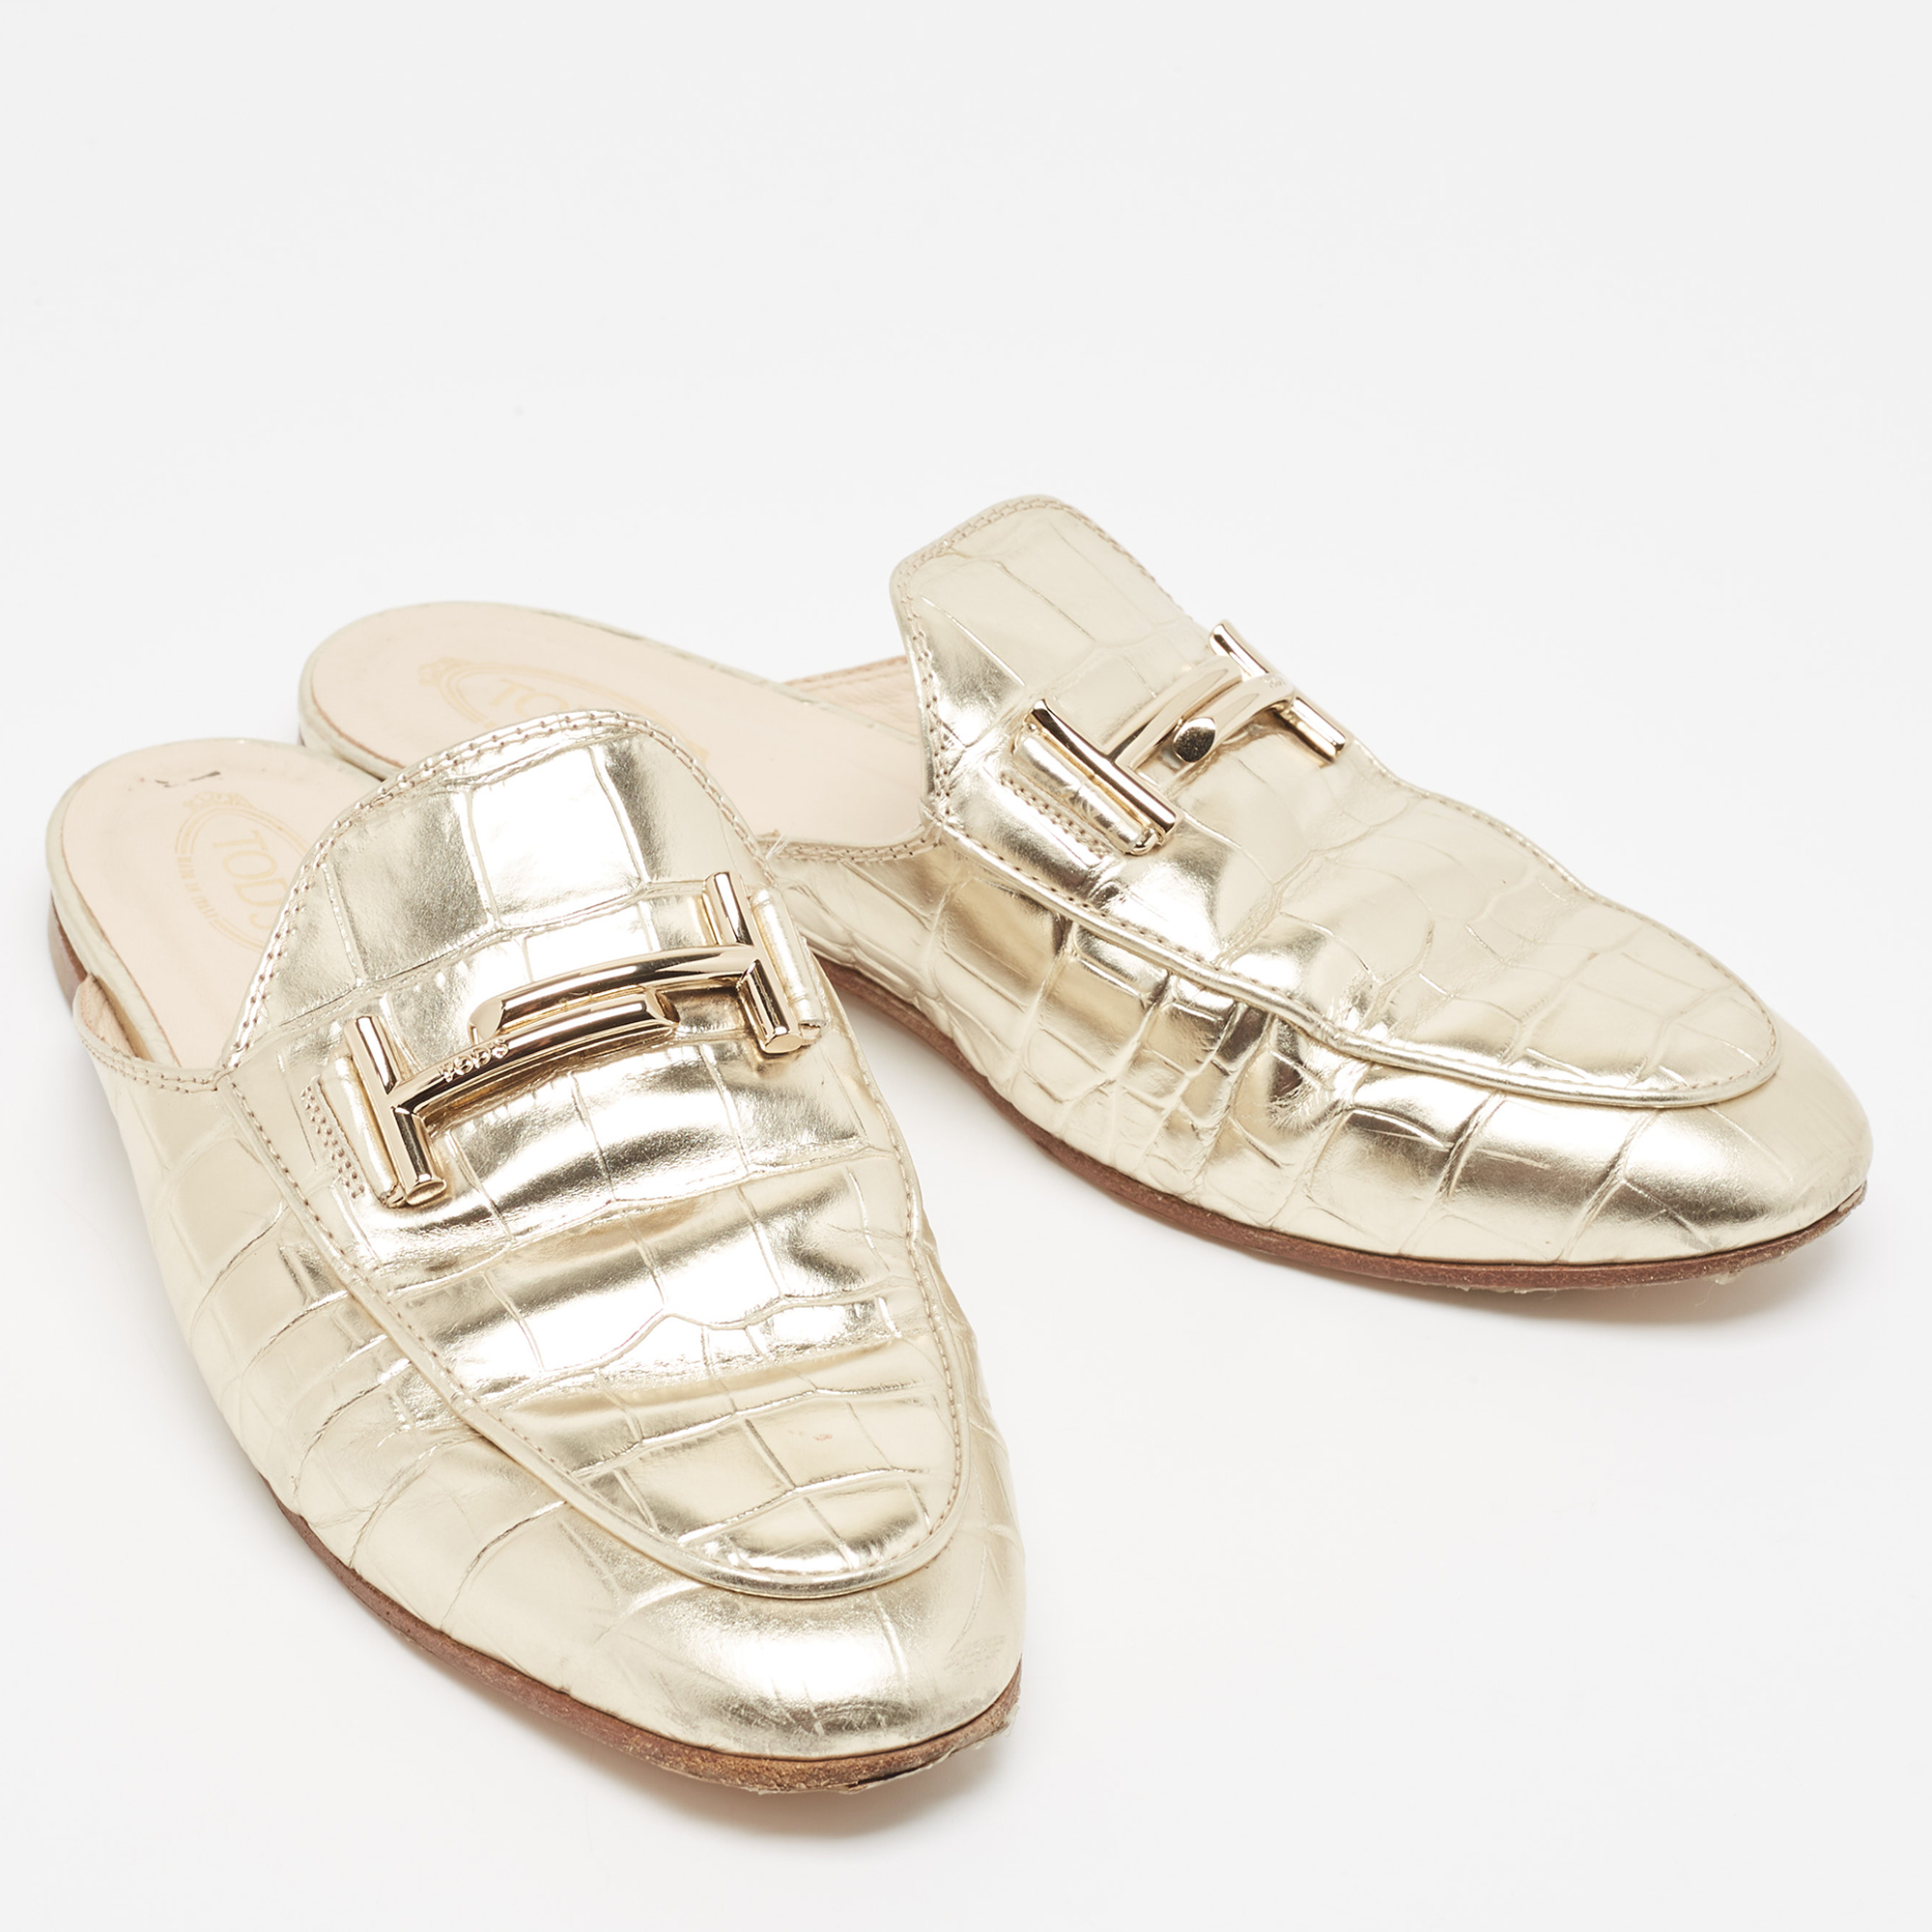 Tod's Metallic Gold Croc Embossed Leather Double T Mules Size 38